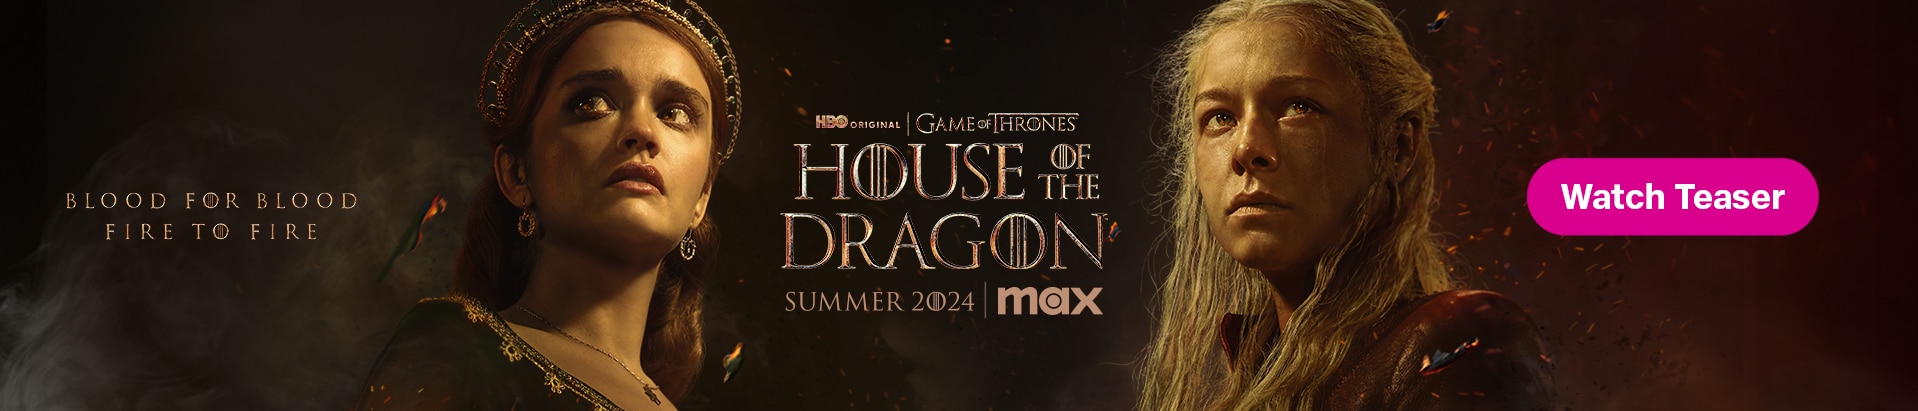 Watch House of the Dragon Streaming Online